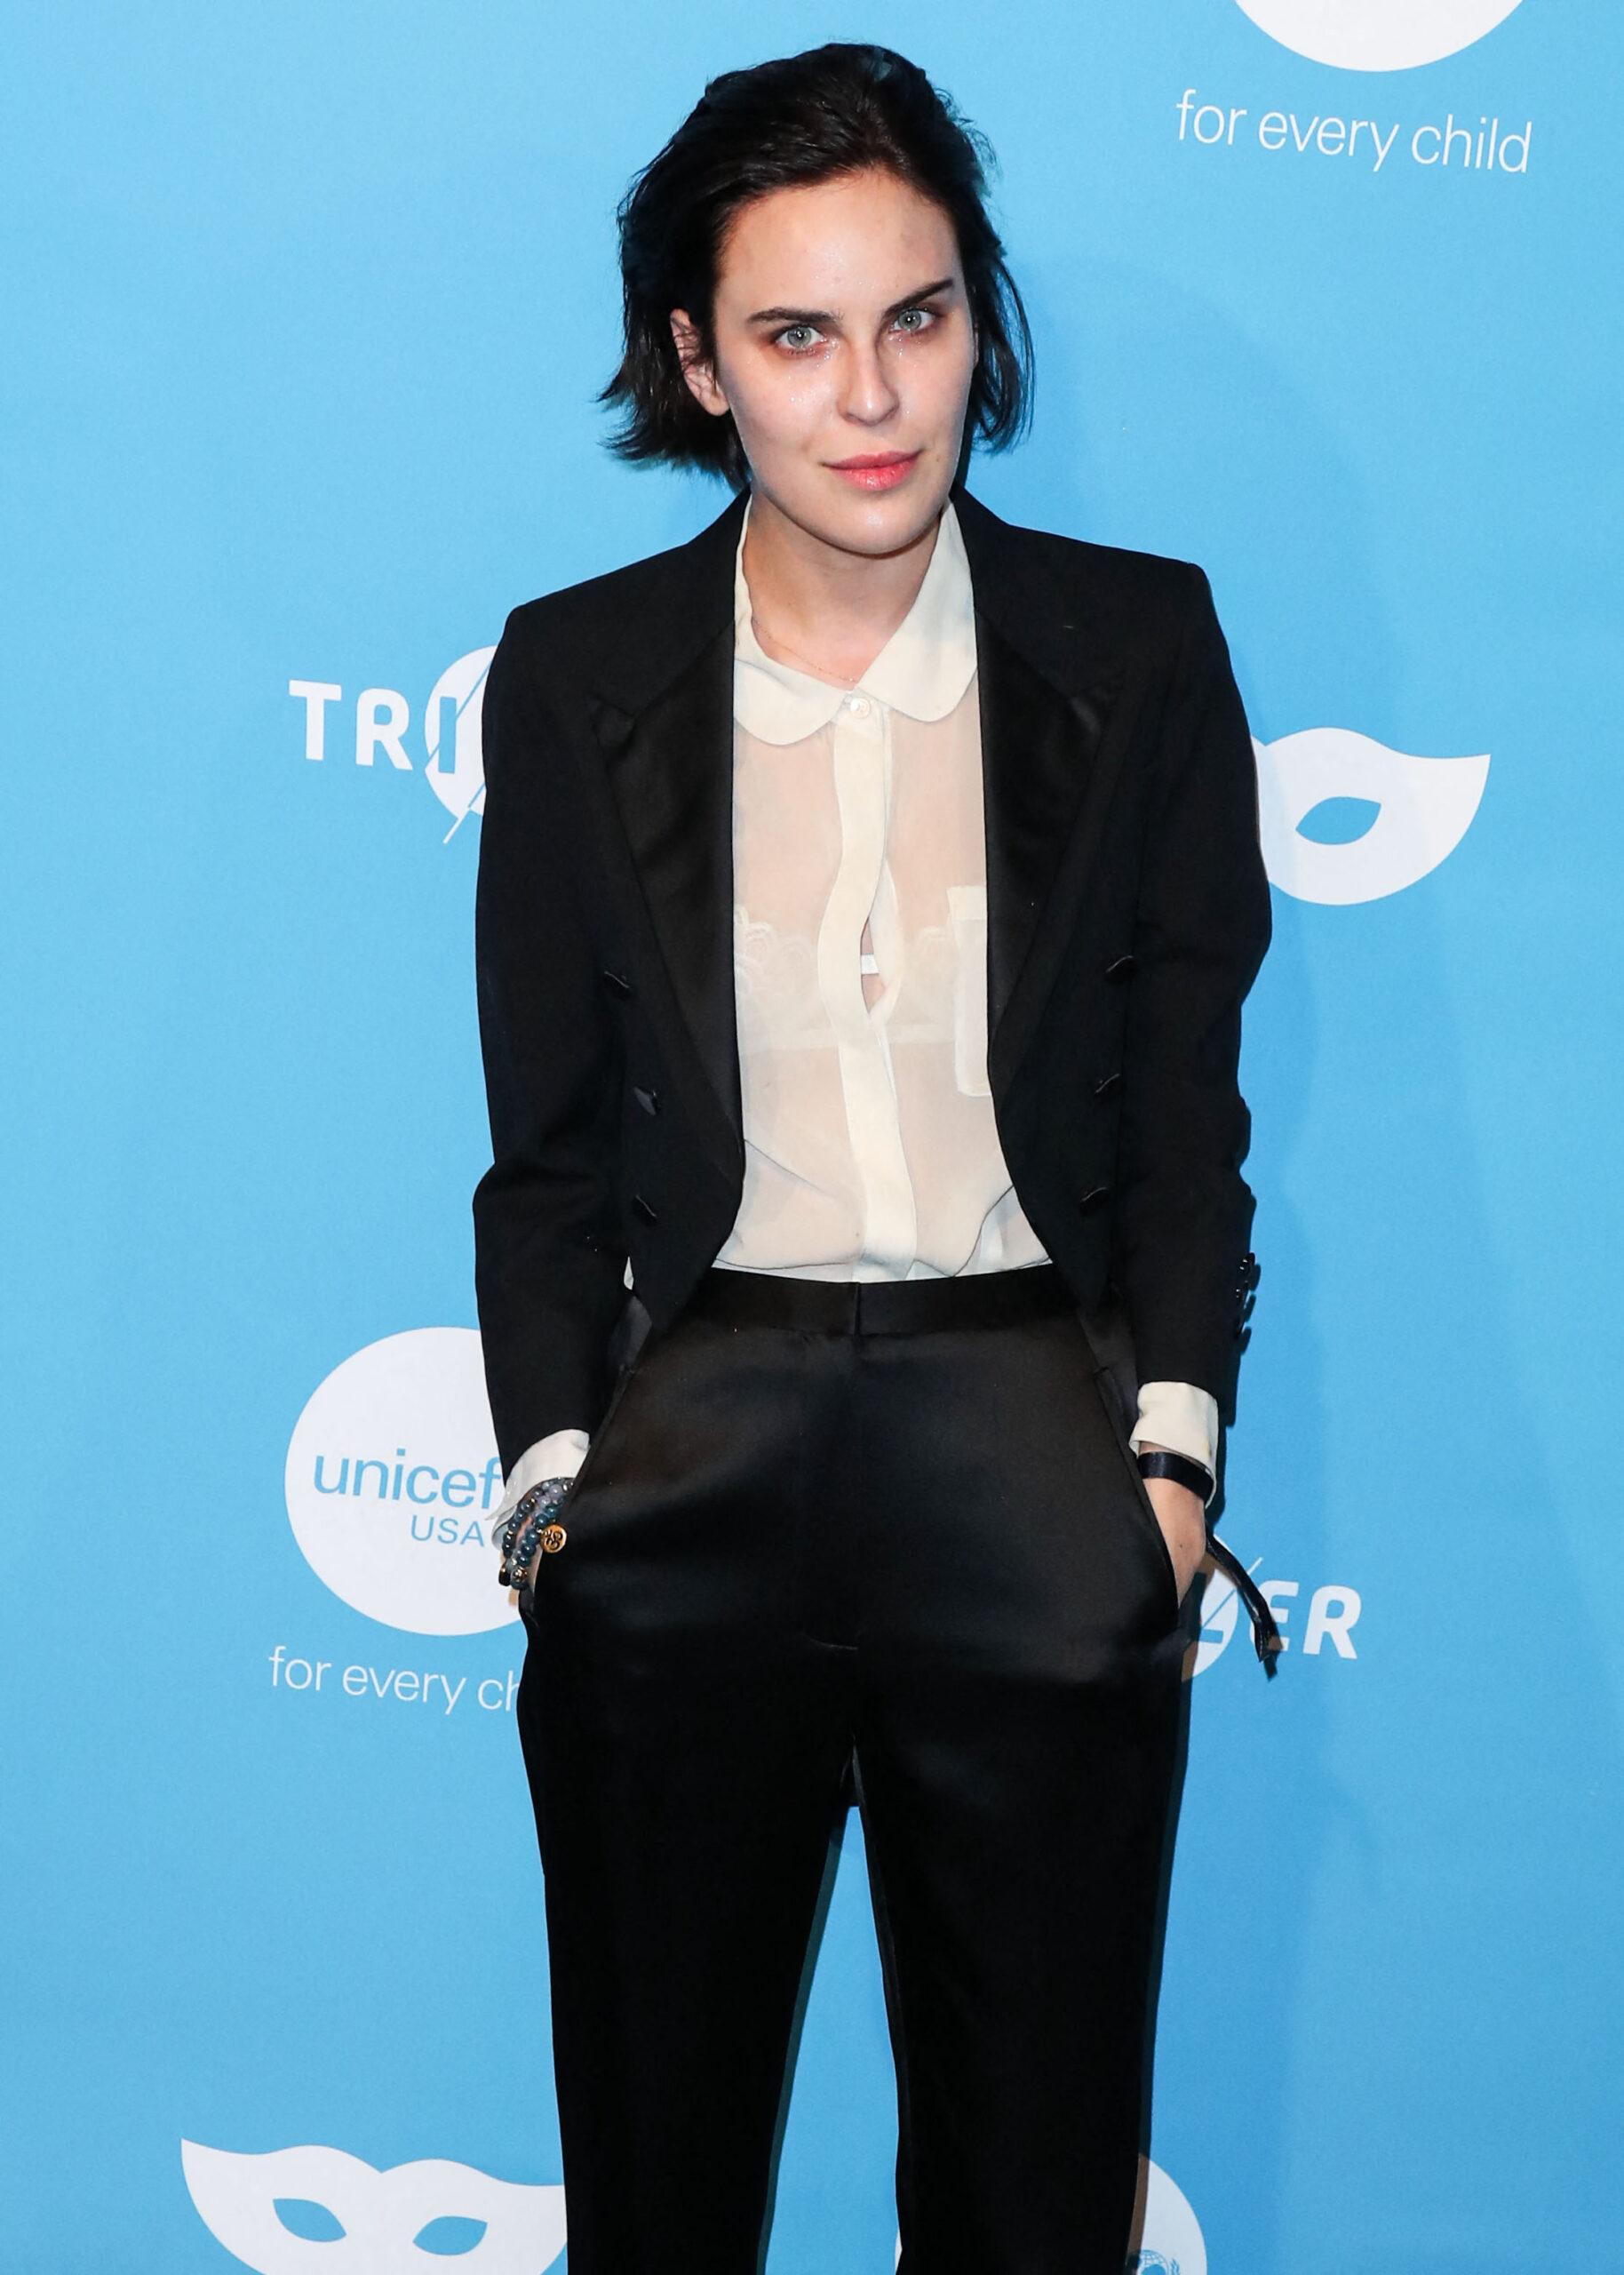 Tallulah Willis Speaks Candidly About Recovering From Eating Disorder